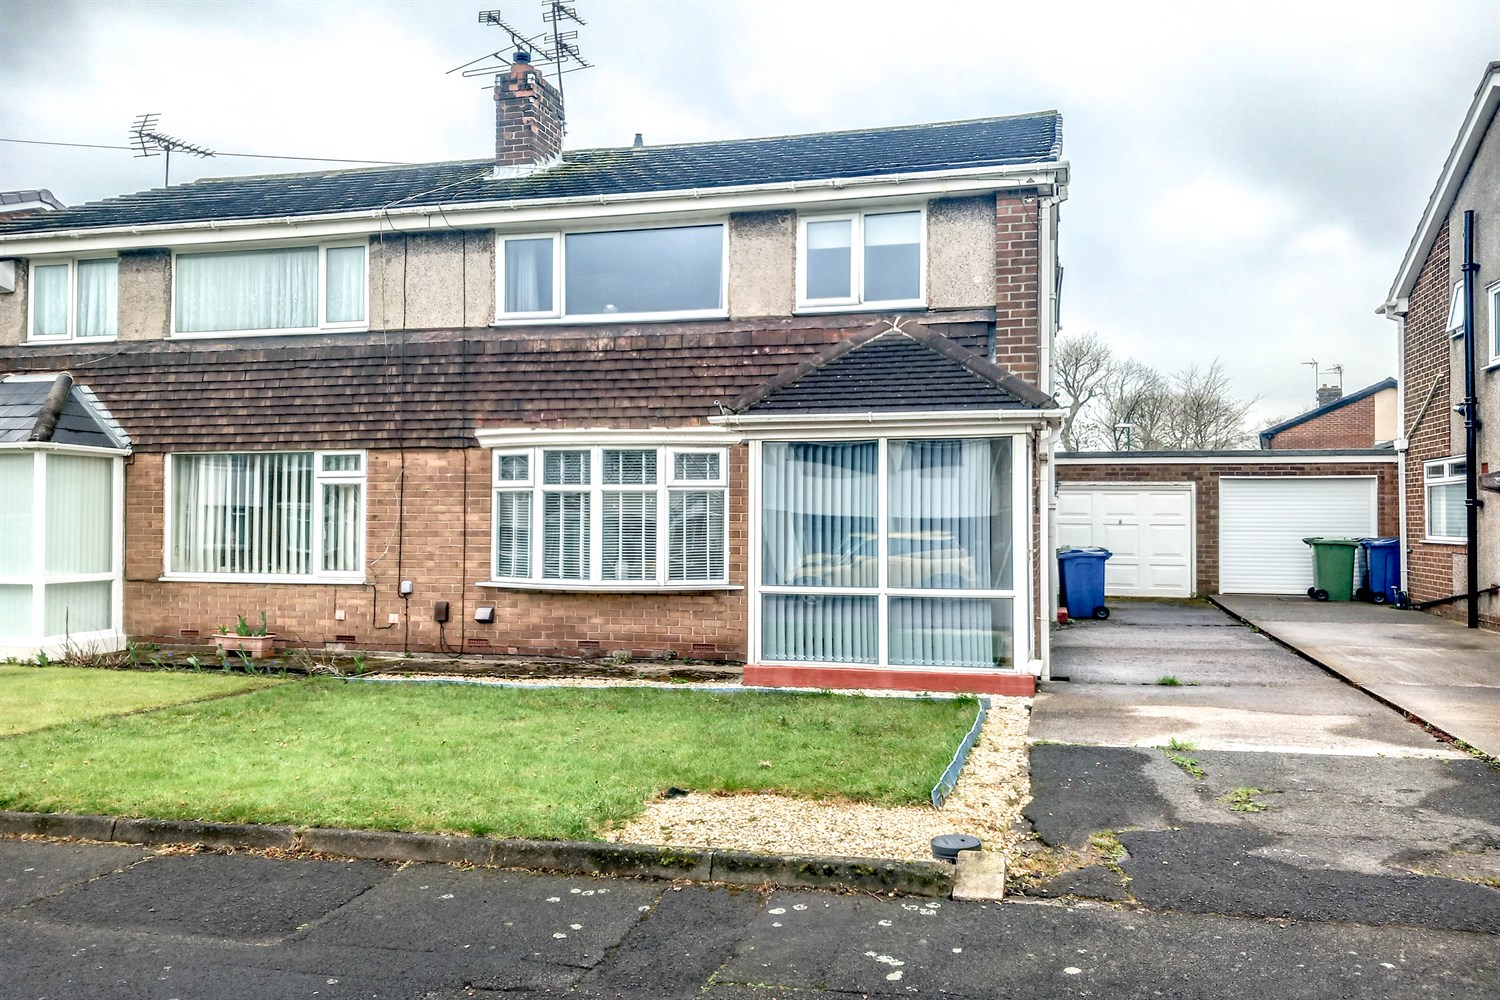 3 bed semi-detached house for sale in Cheviot Road, Jarrow - Property Image 1